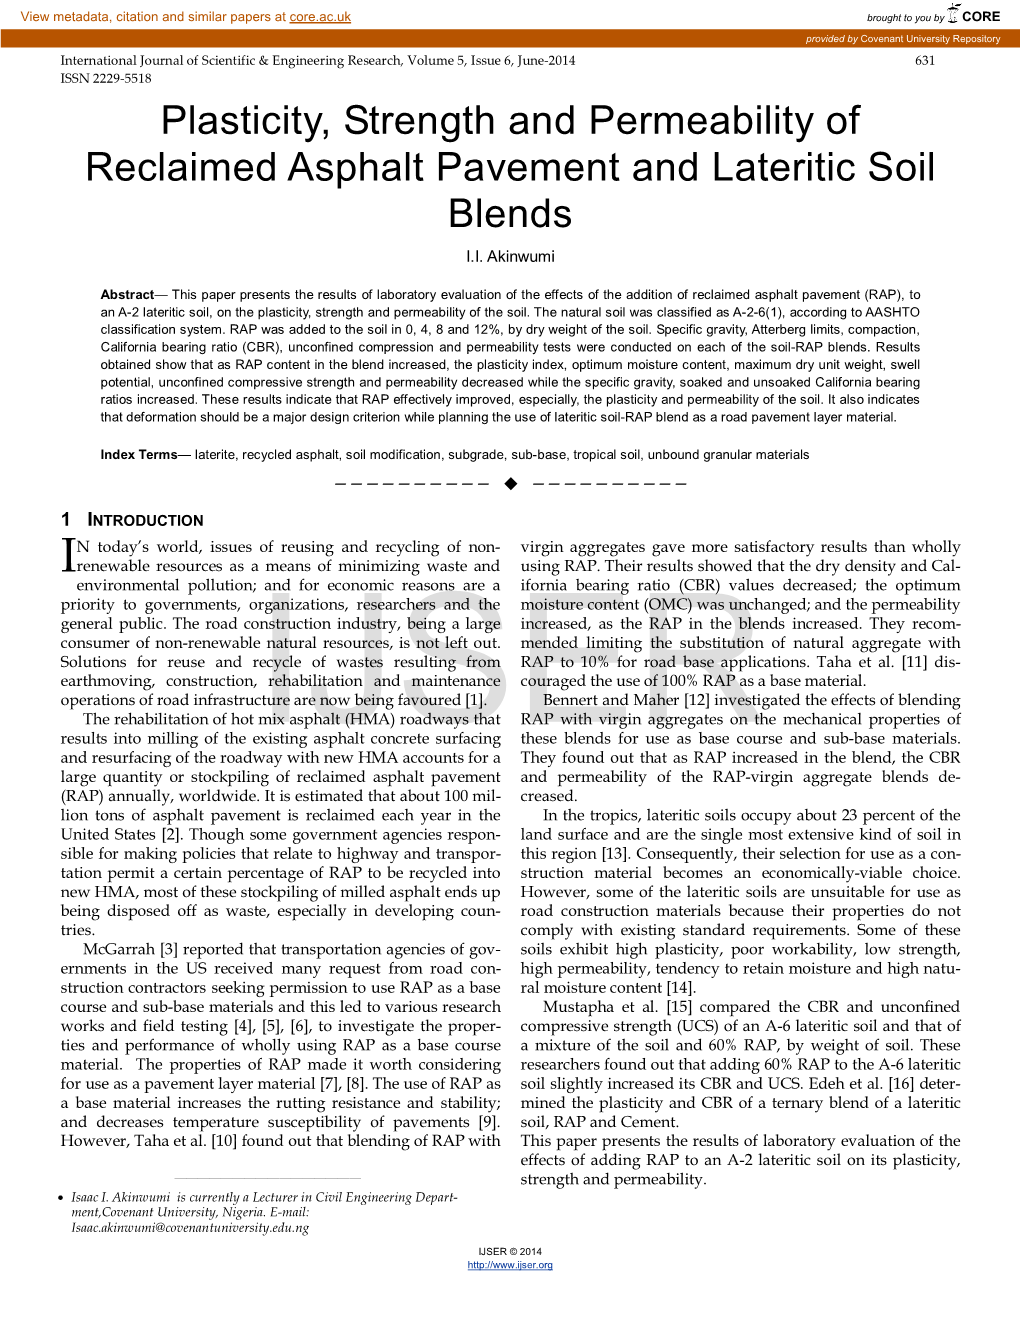 Plasticity, Strength and Permeability of Reclaimed Asphalt Pavement and Lateritic Soil Blends I.I